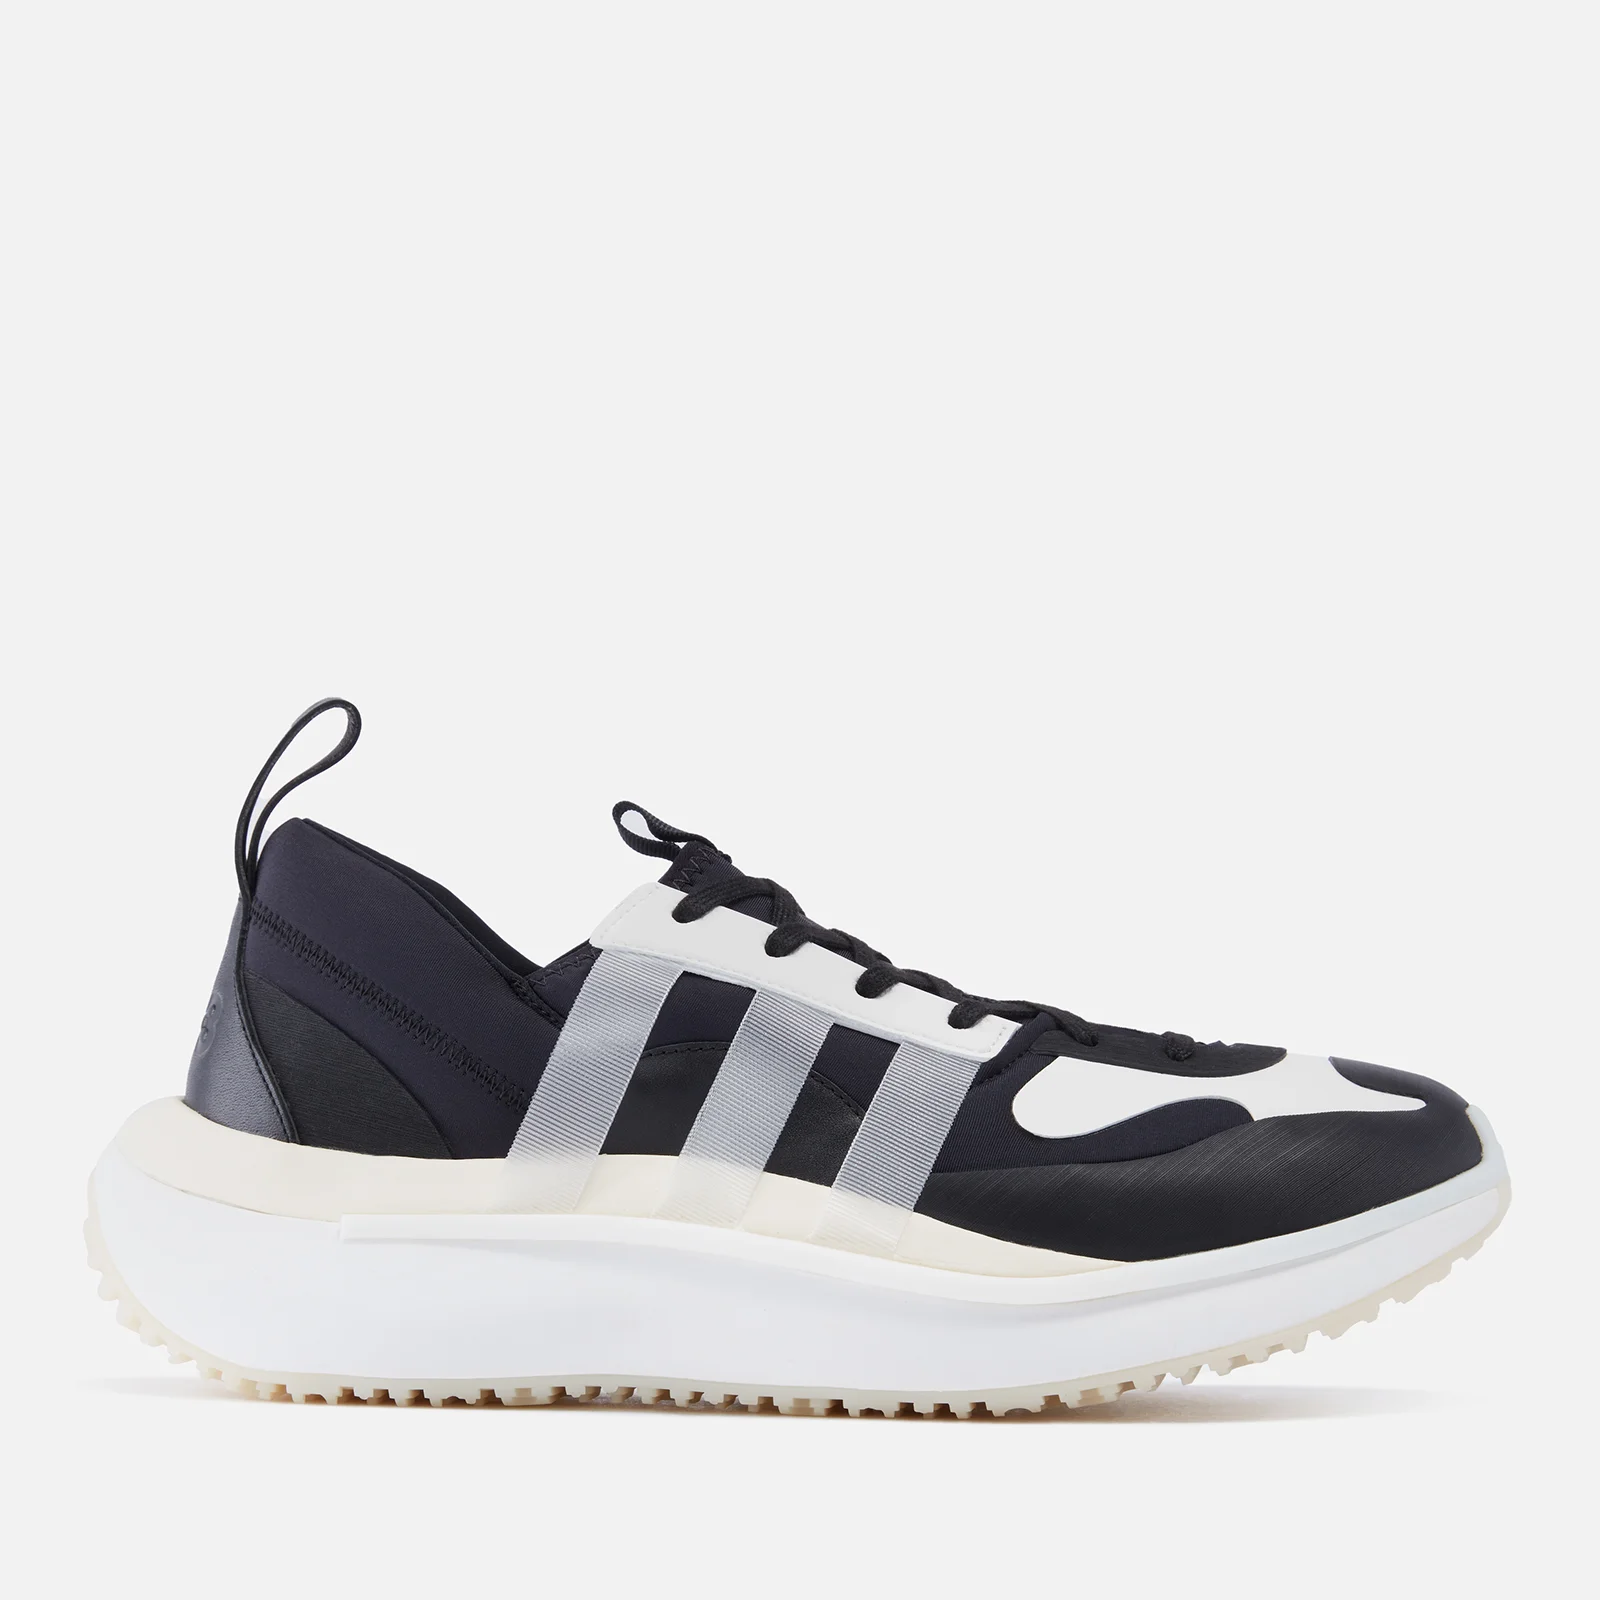 Y-3 Men Qisan Cozy V2 Neoprene and Leather Trainers Image 1